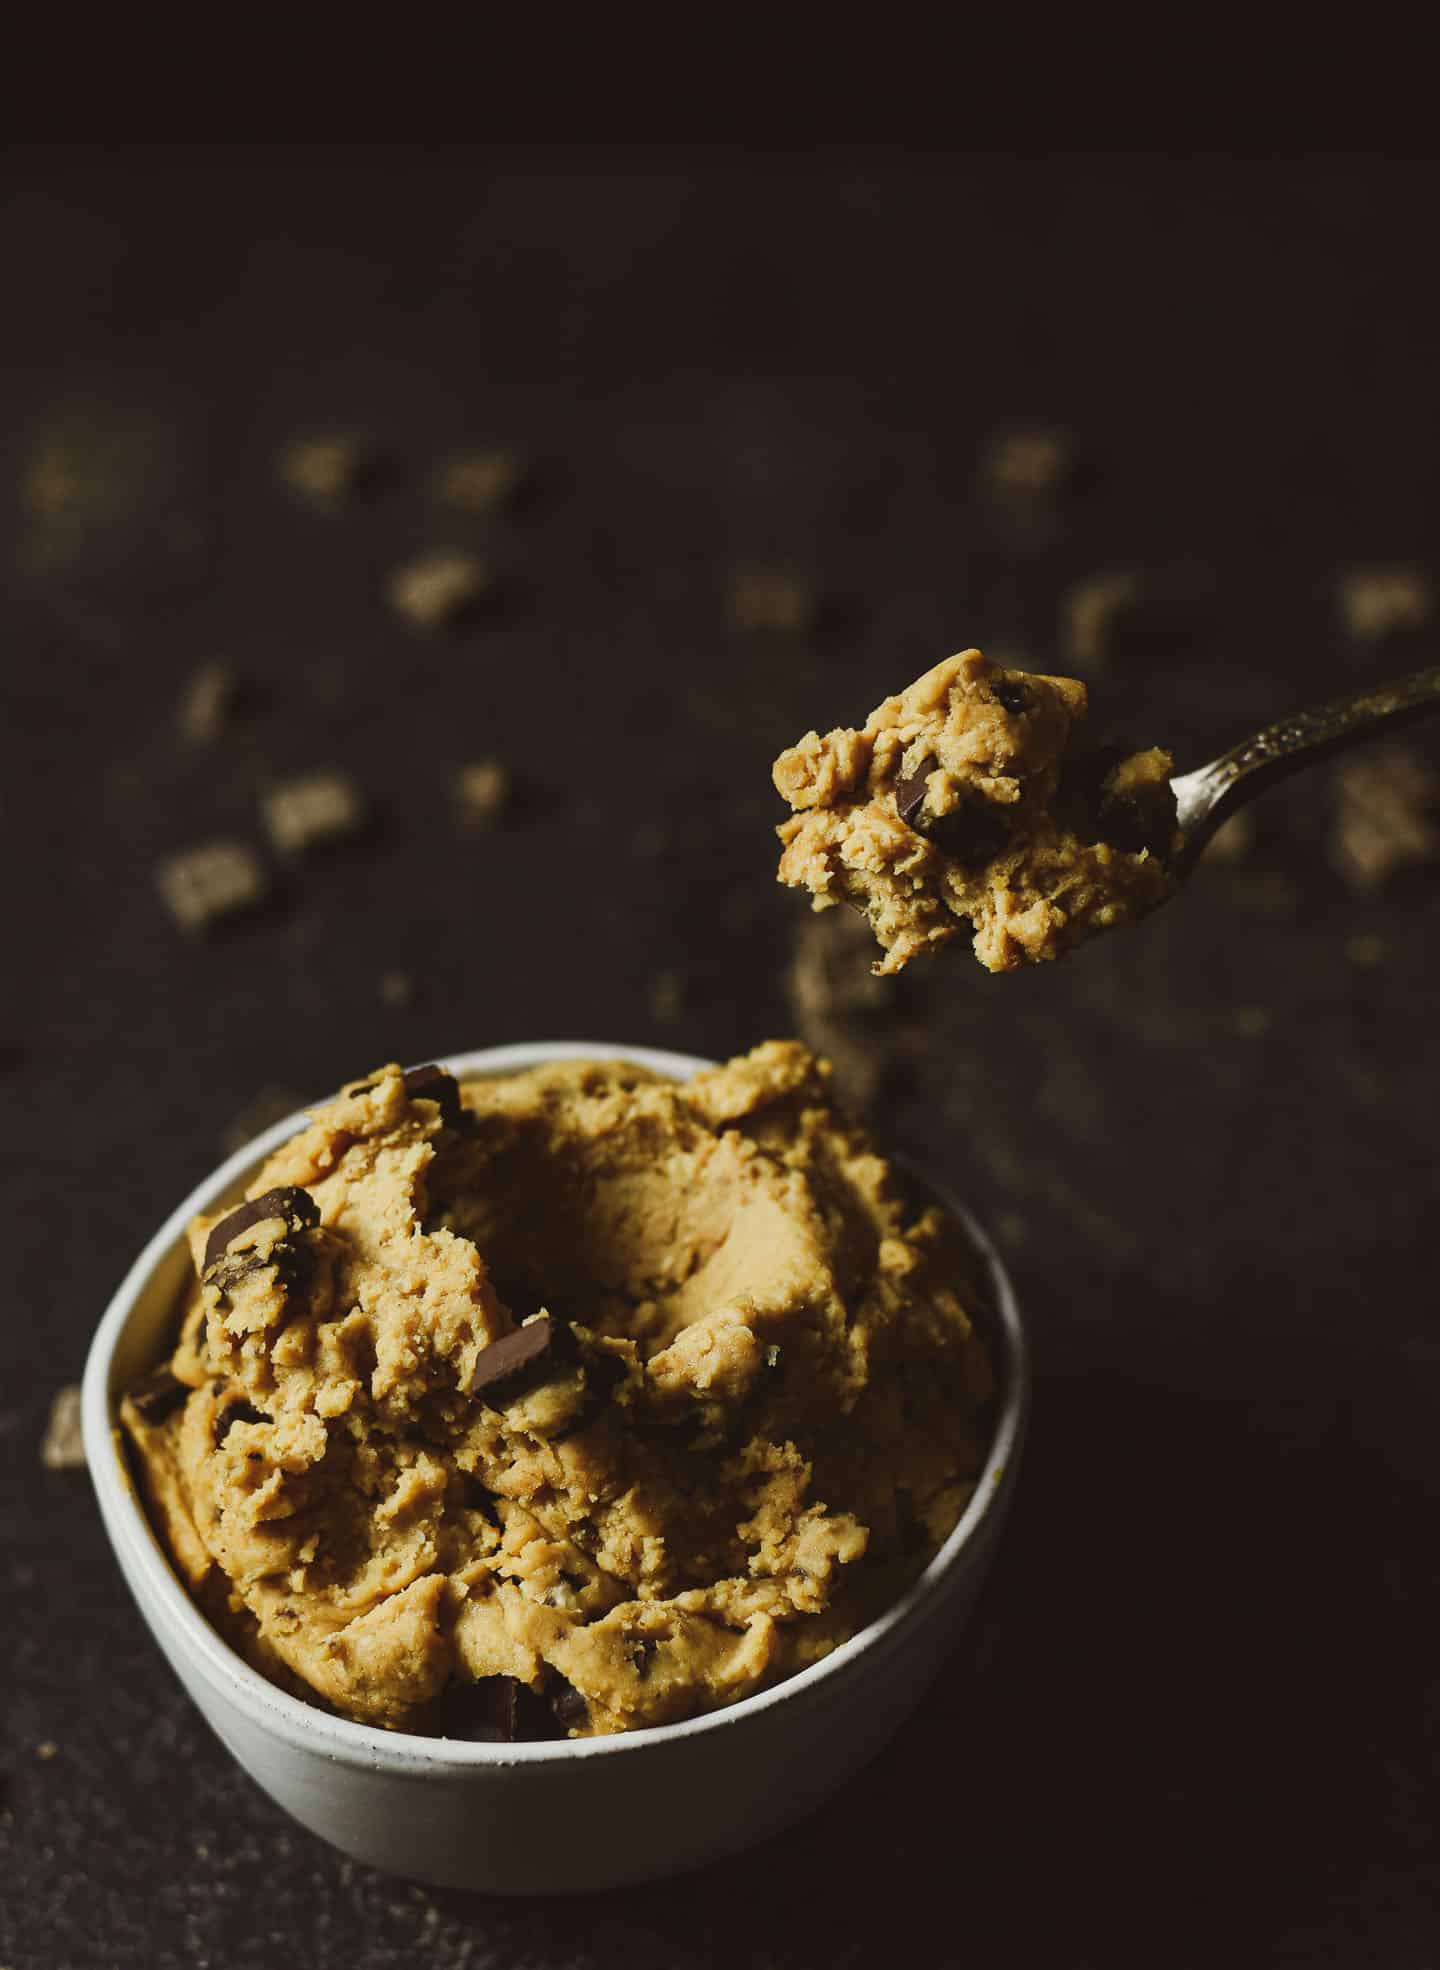 This Vegan Edible Cookie Dough is healthy, delicious, and so easy to make. All you need are a few simple ingredients to make this incredibly decadent dessert. It's naturally gluten-free, dairy-free, and ready in 5 minutes. 